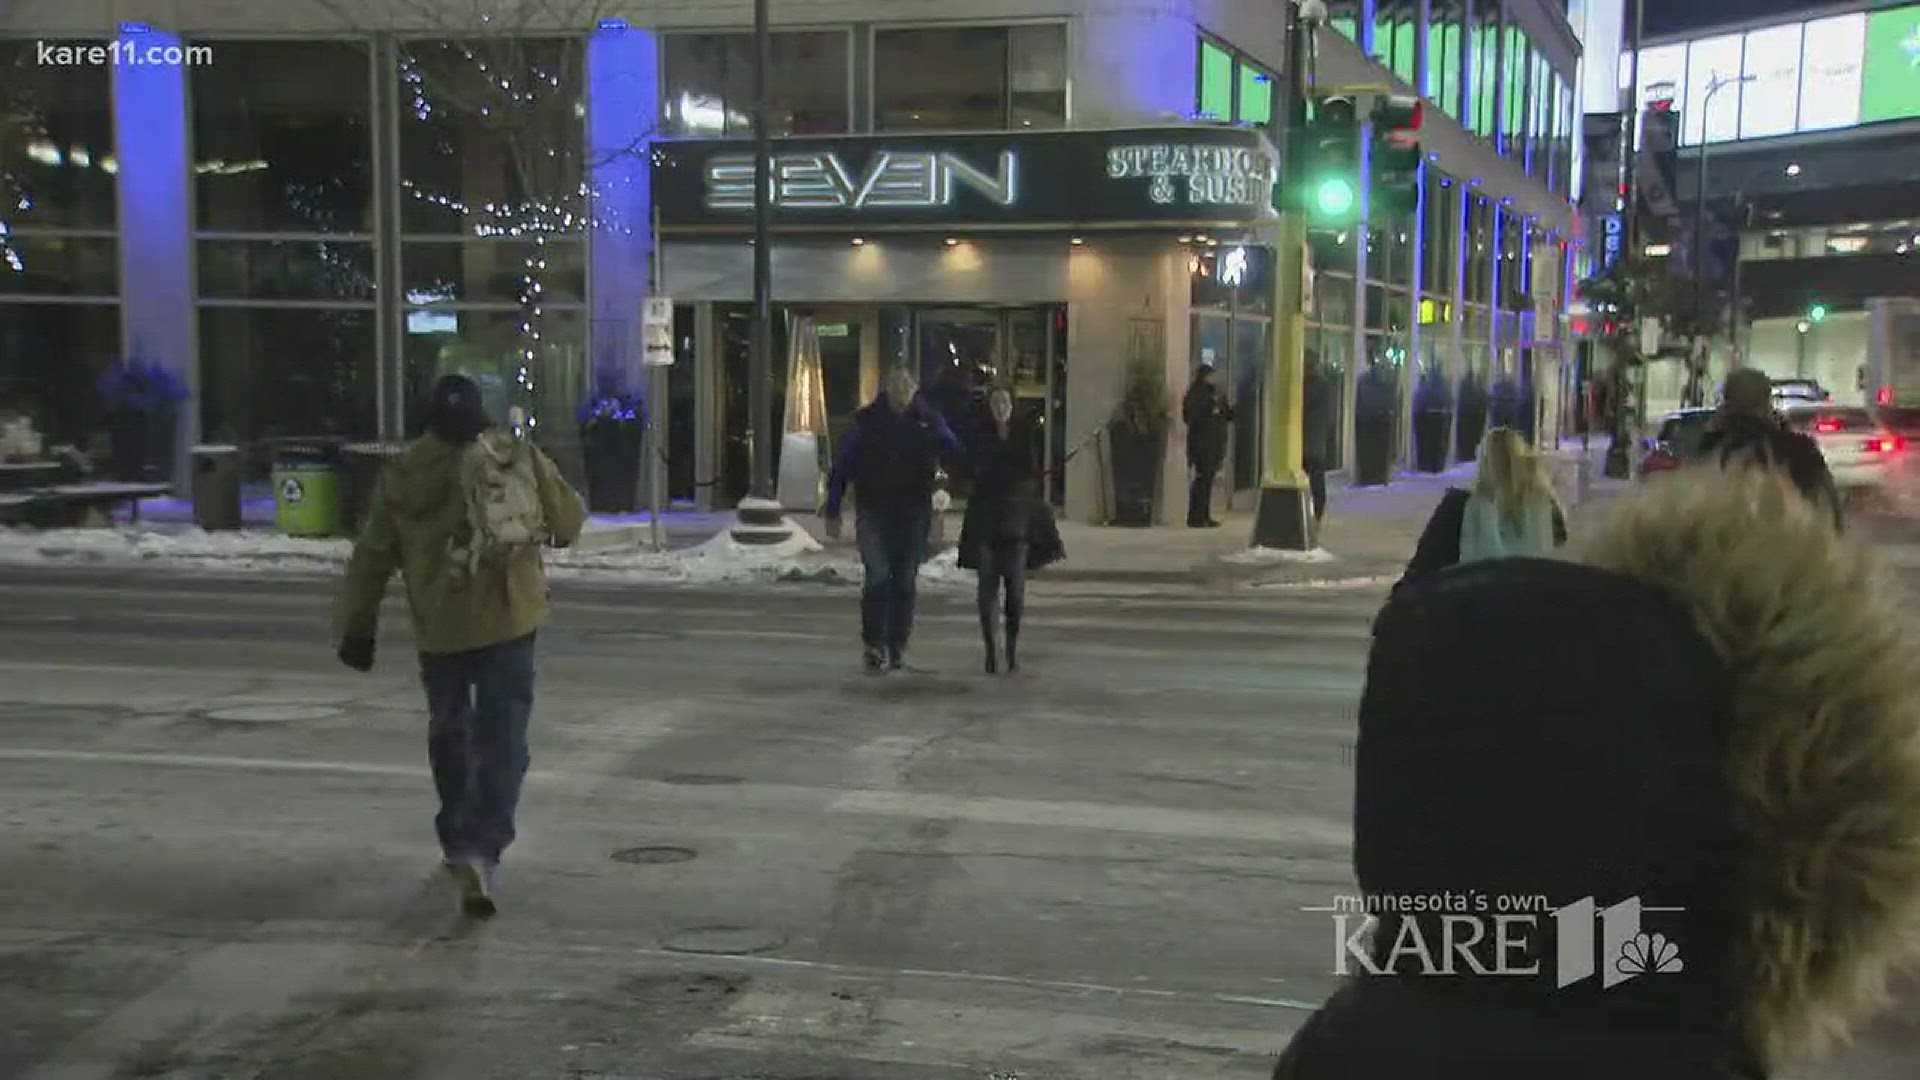 Thousands celebrate New Year's Eve despite -25 wind chill